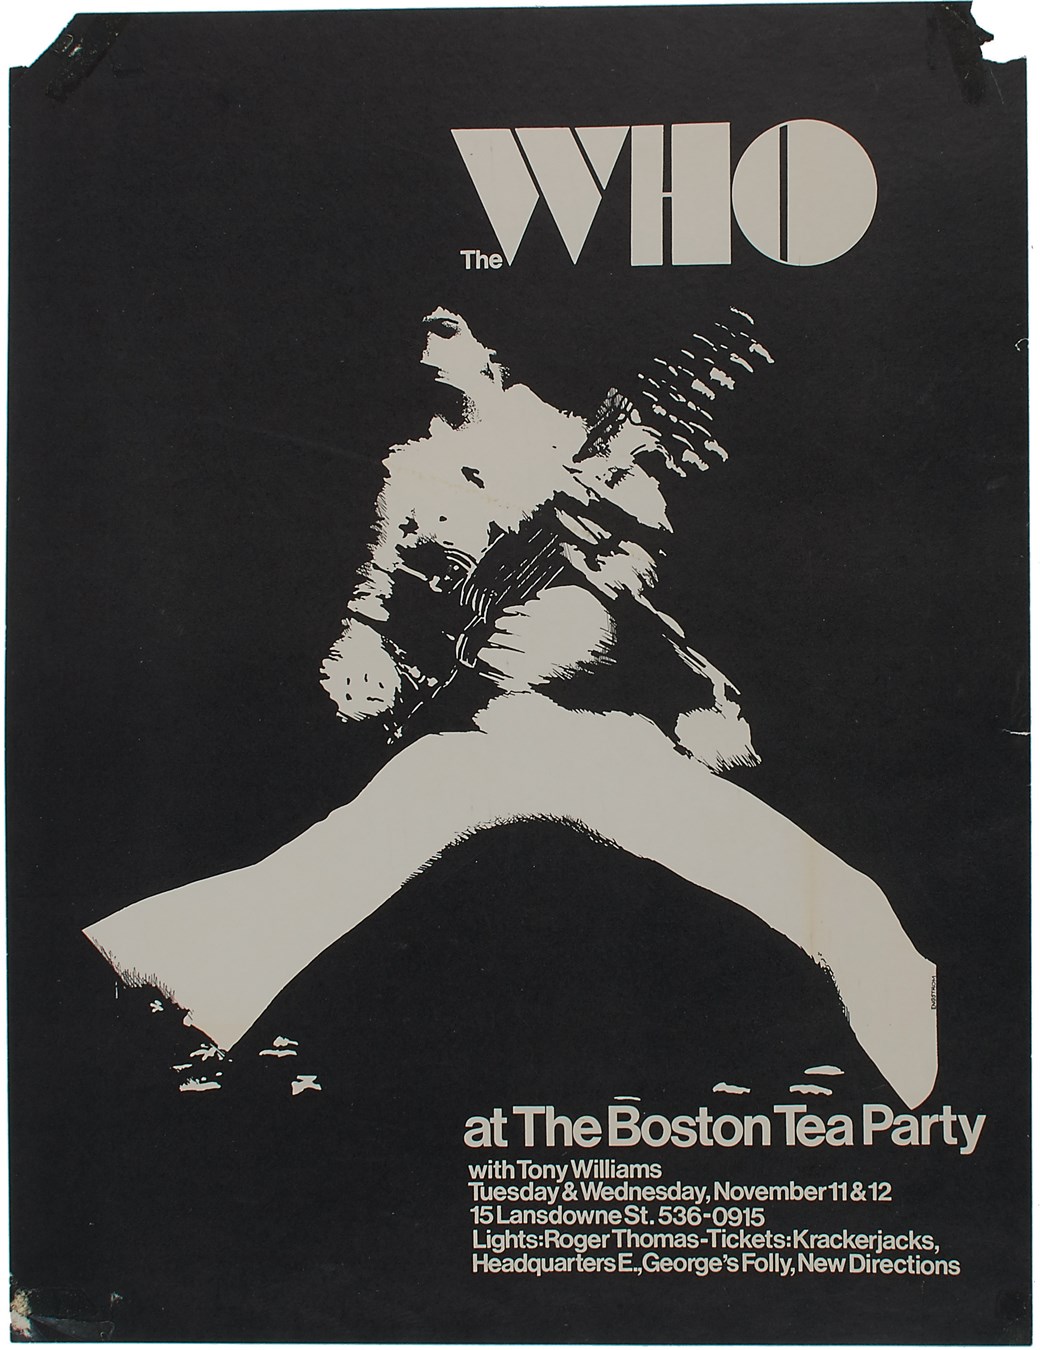 - Rare "The Who" at Boston Tea Party Boxing-Style Poster - Classic Townsend Image